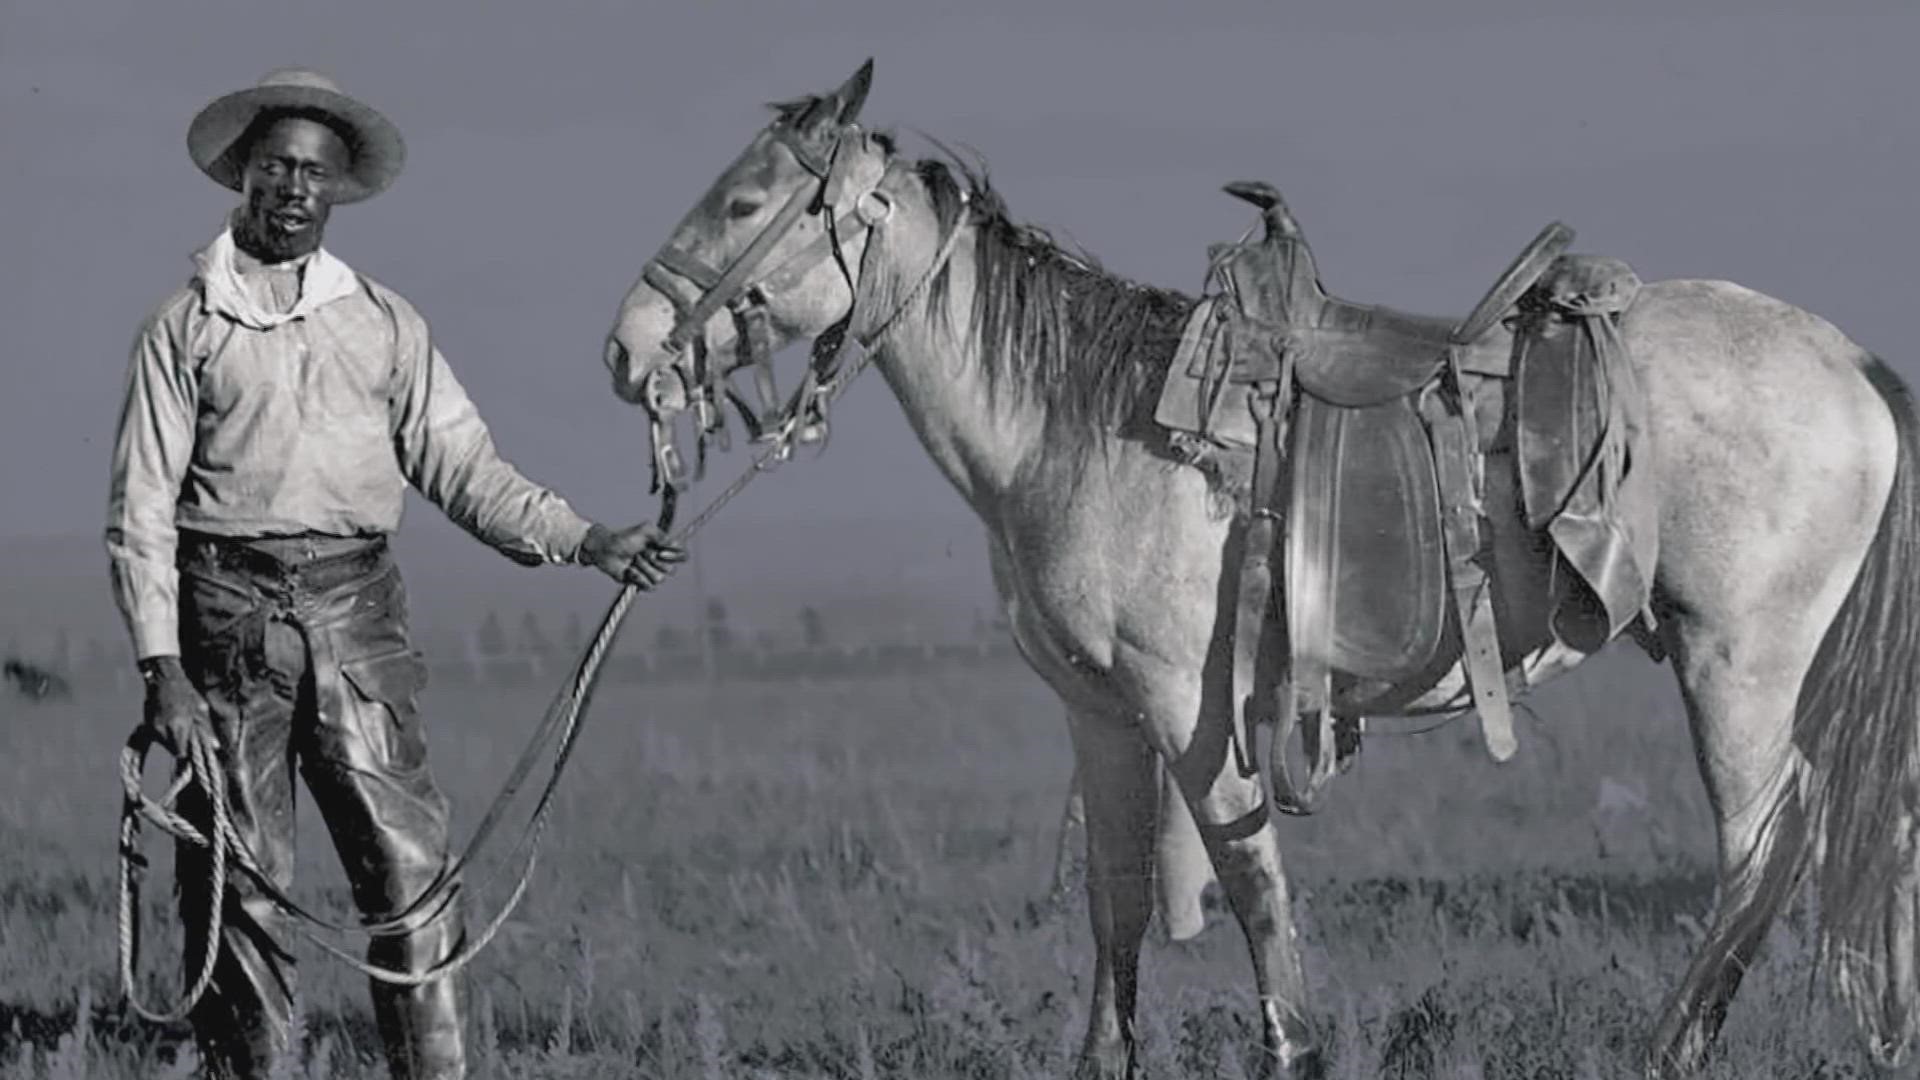 Black Cowboys: An American Story will be at the African American Museum through the spring.